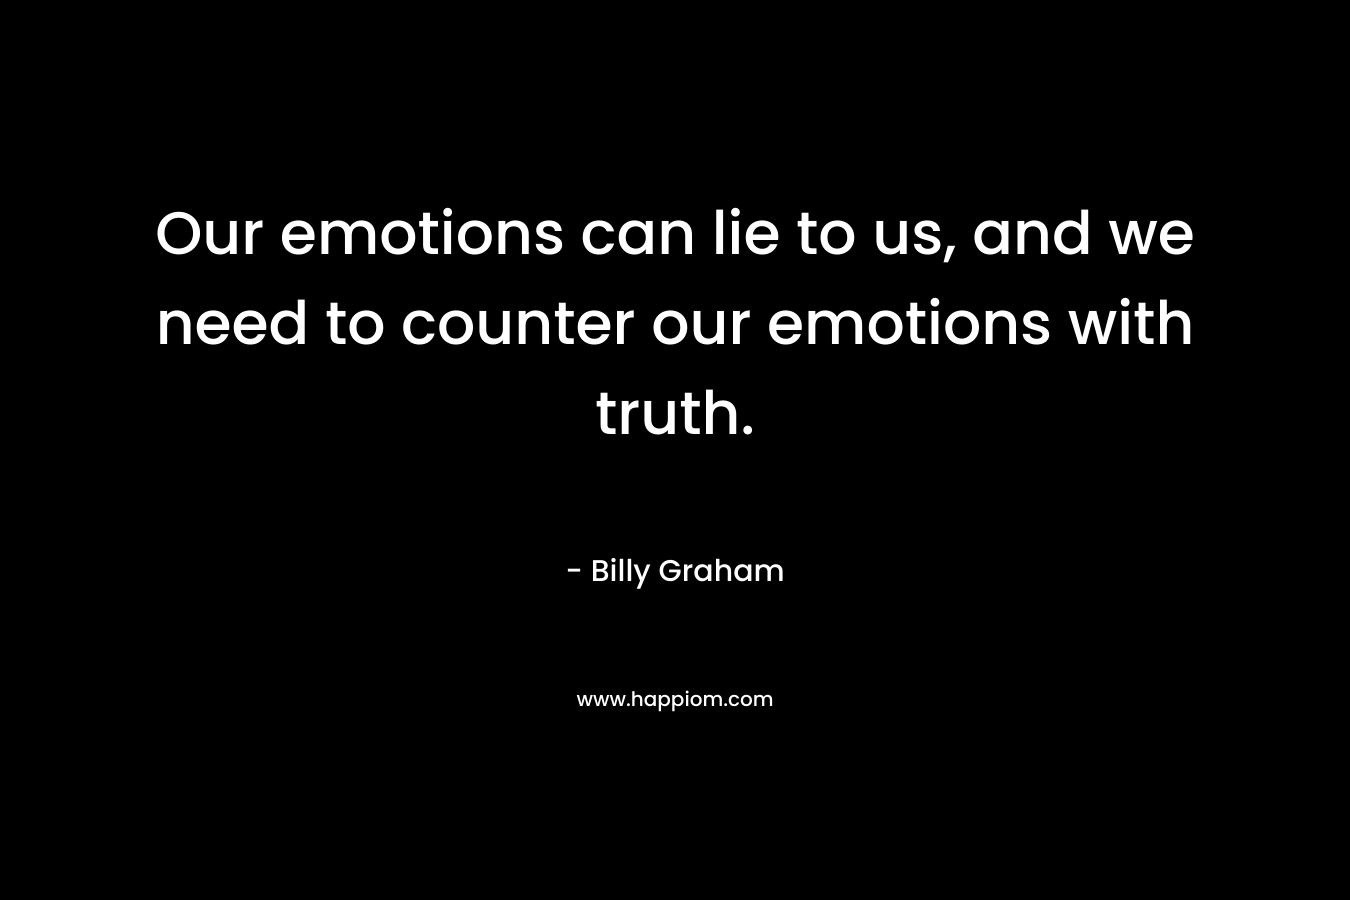 Our emotions can lie to us, and we need to counter our emotions with truth. – Billy Graham